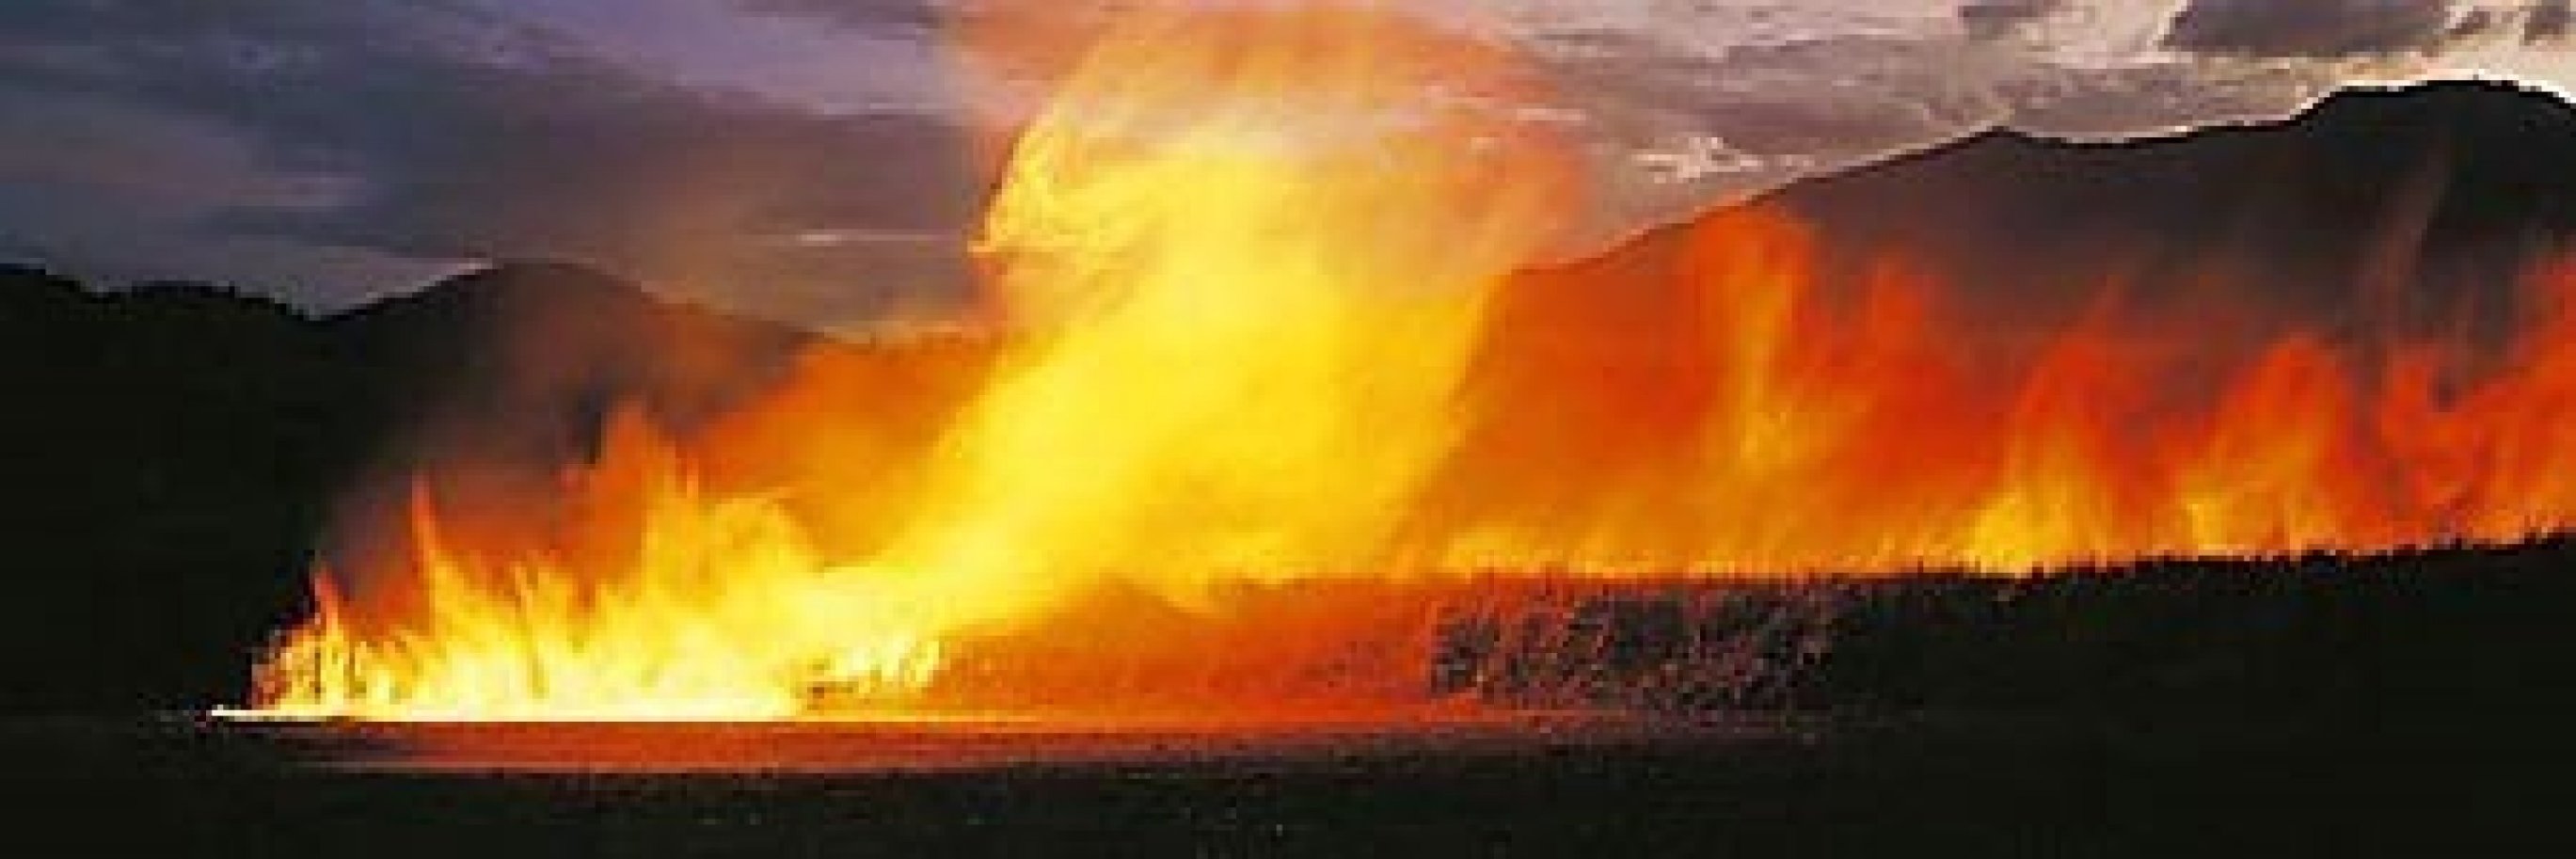 Cane Fire (Redlynch, Cairns) 1.5M Huge Panorama by Peter Lik